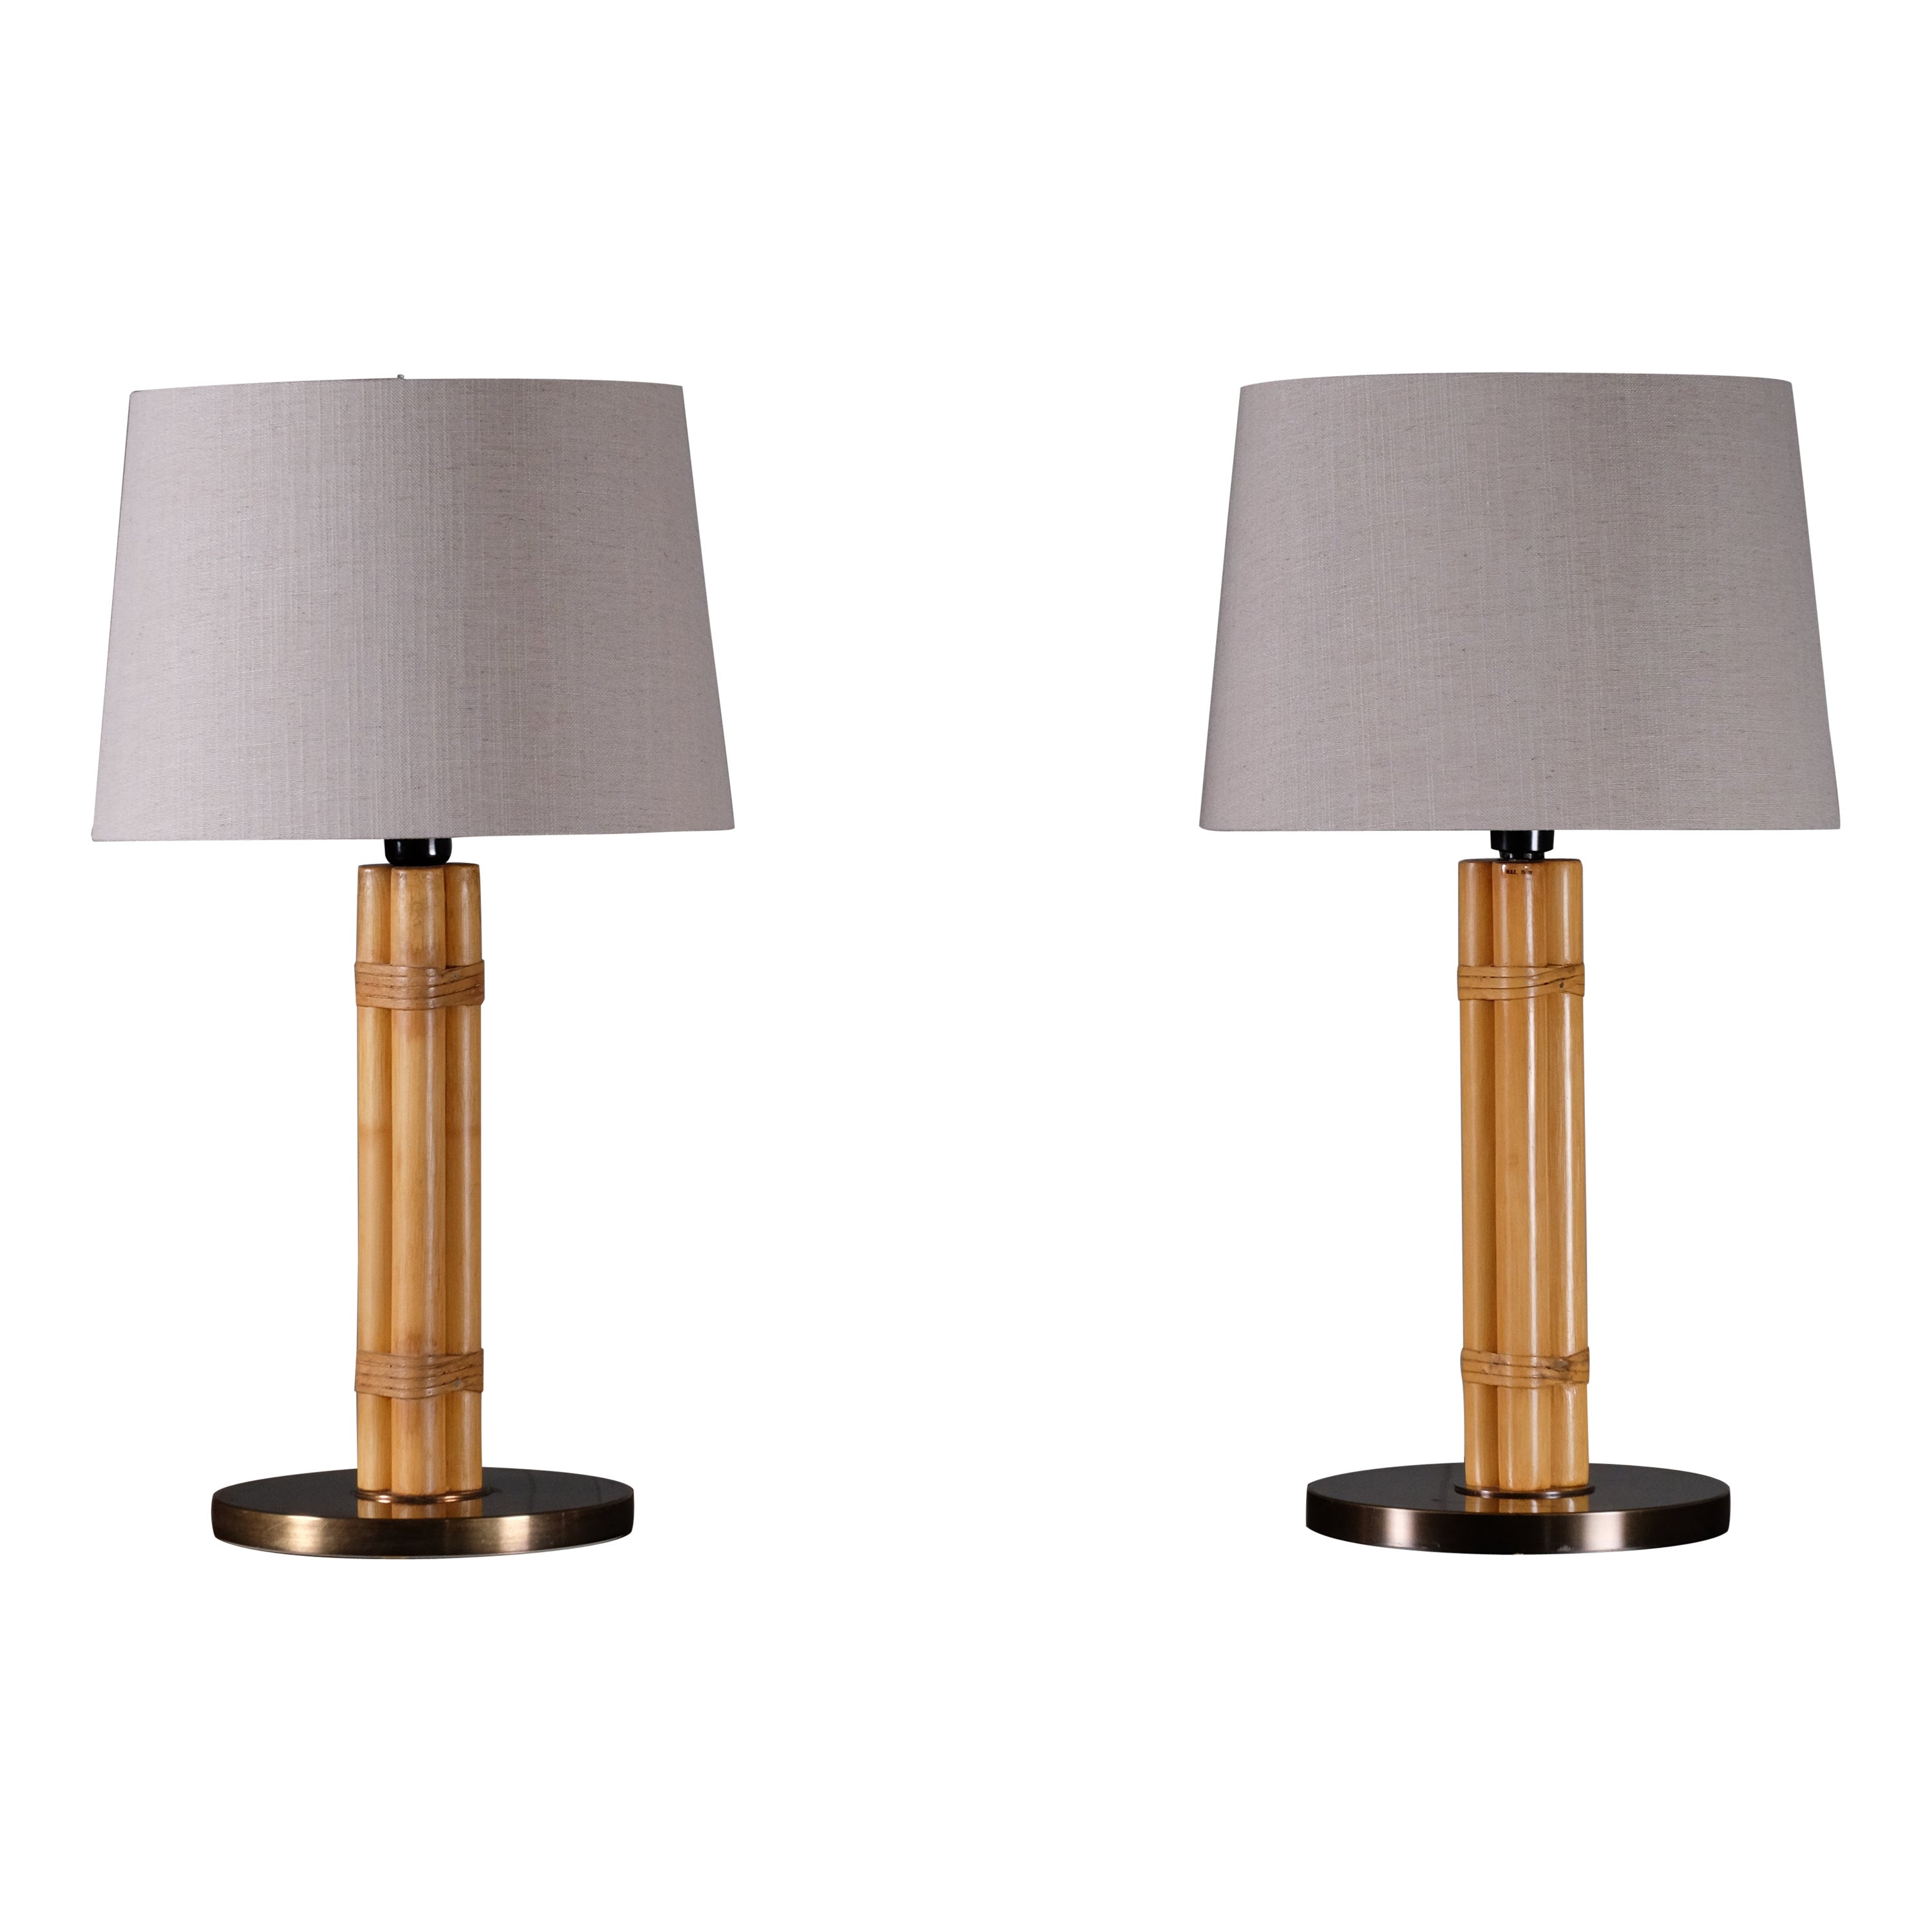 Pair of Hans-Agne Jakobsson Brass & Bamboo Table Lamps, 1970s